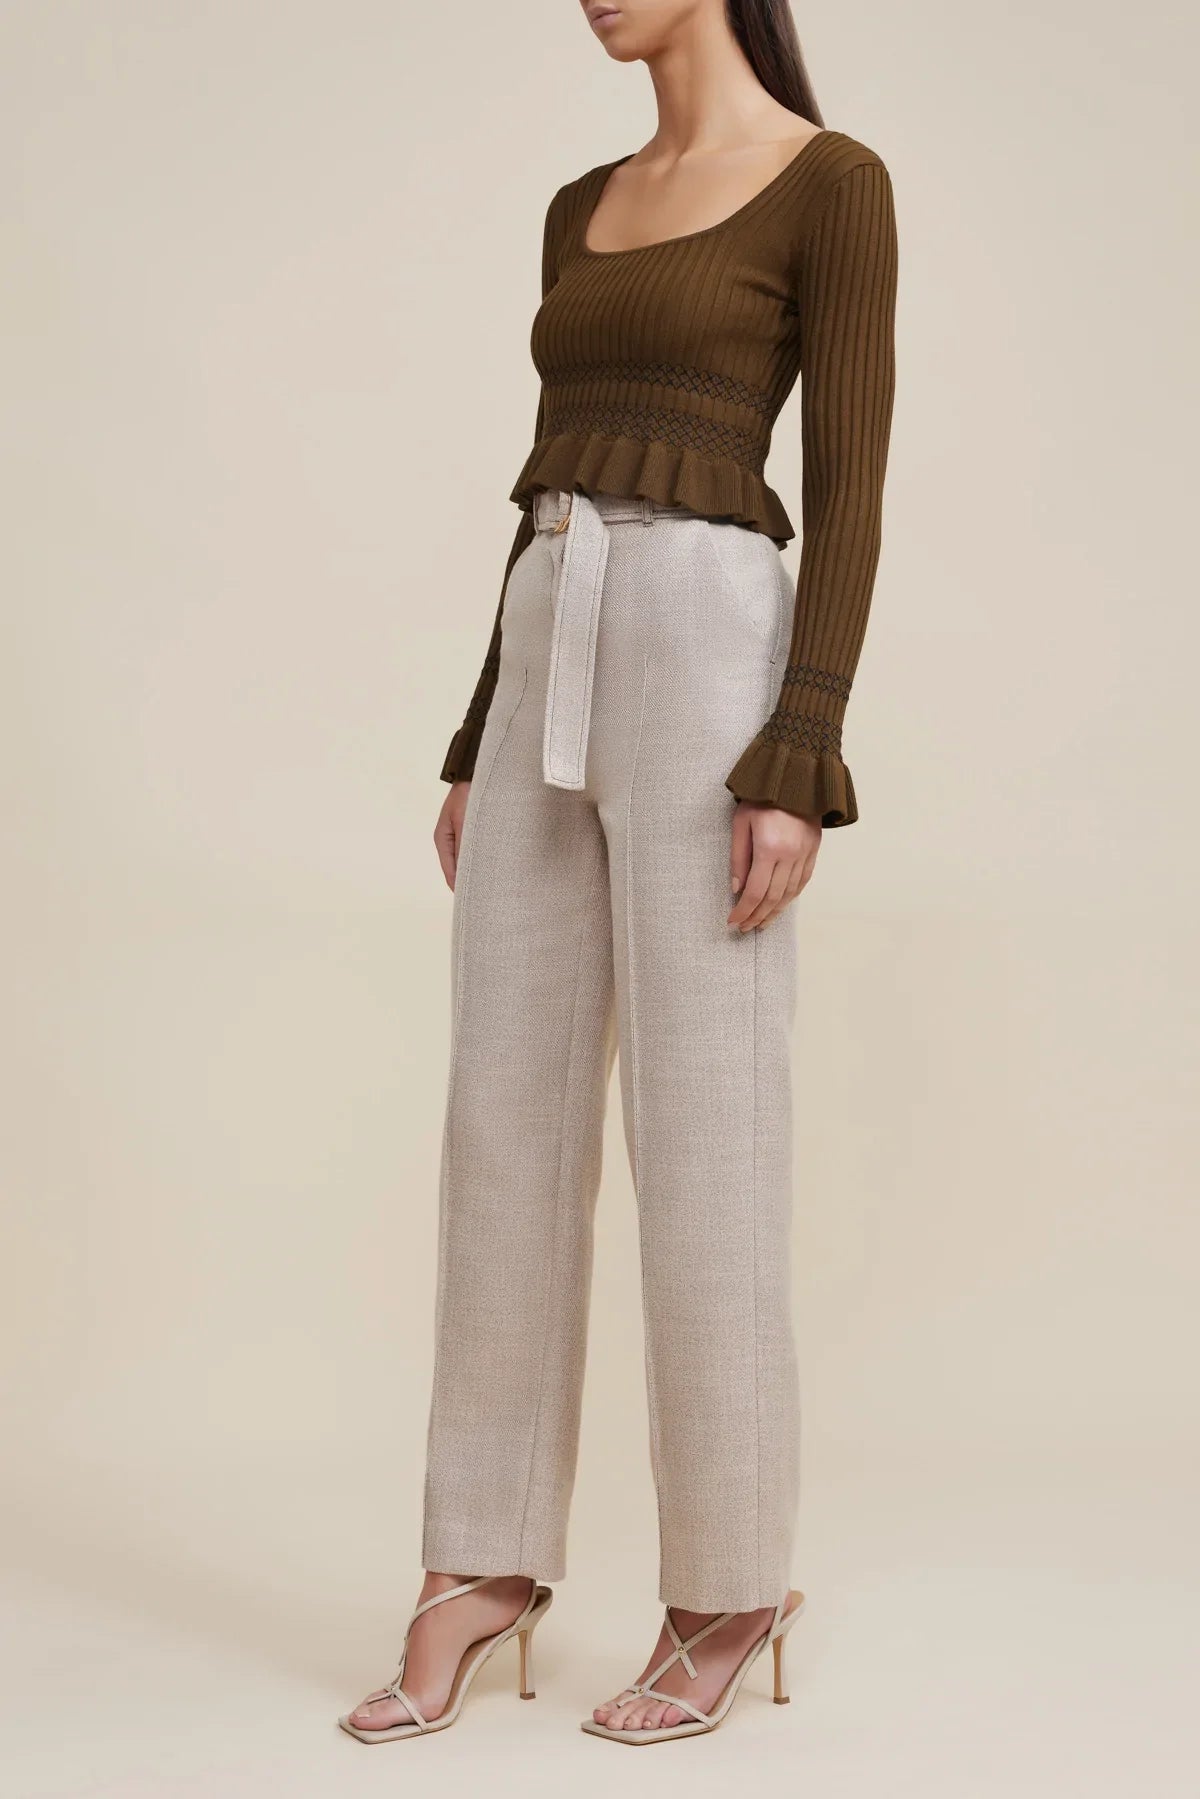 ACLER YERBURY PANT - Bread Boutique  - ACLER, GLAMOROUS, PANT, SOFT, SOPHISTICATED, STUNNING, TAILORED, WAISTED, WOOL - Darwin boutique - Darwin fashion